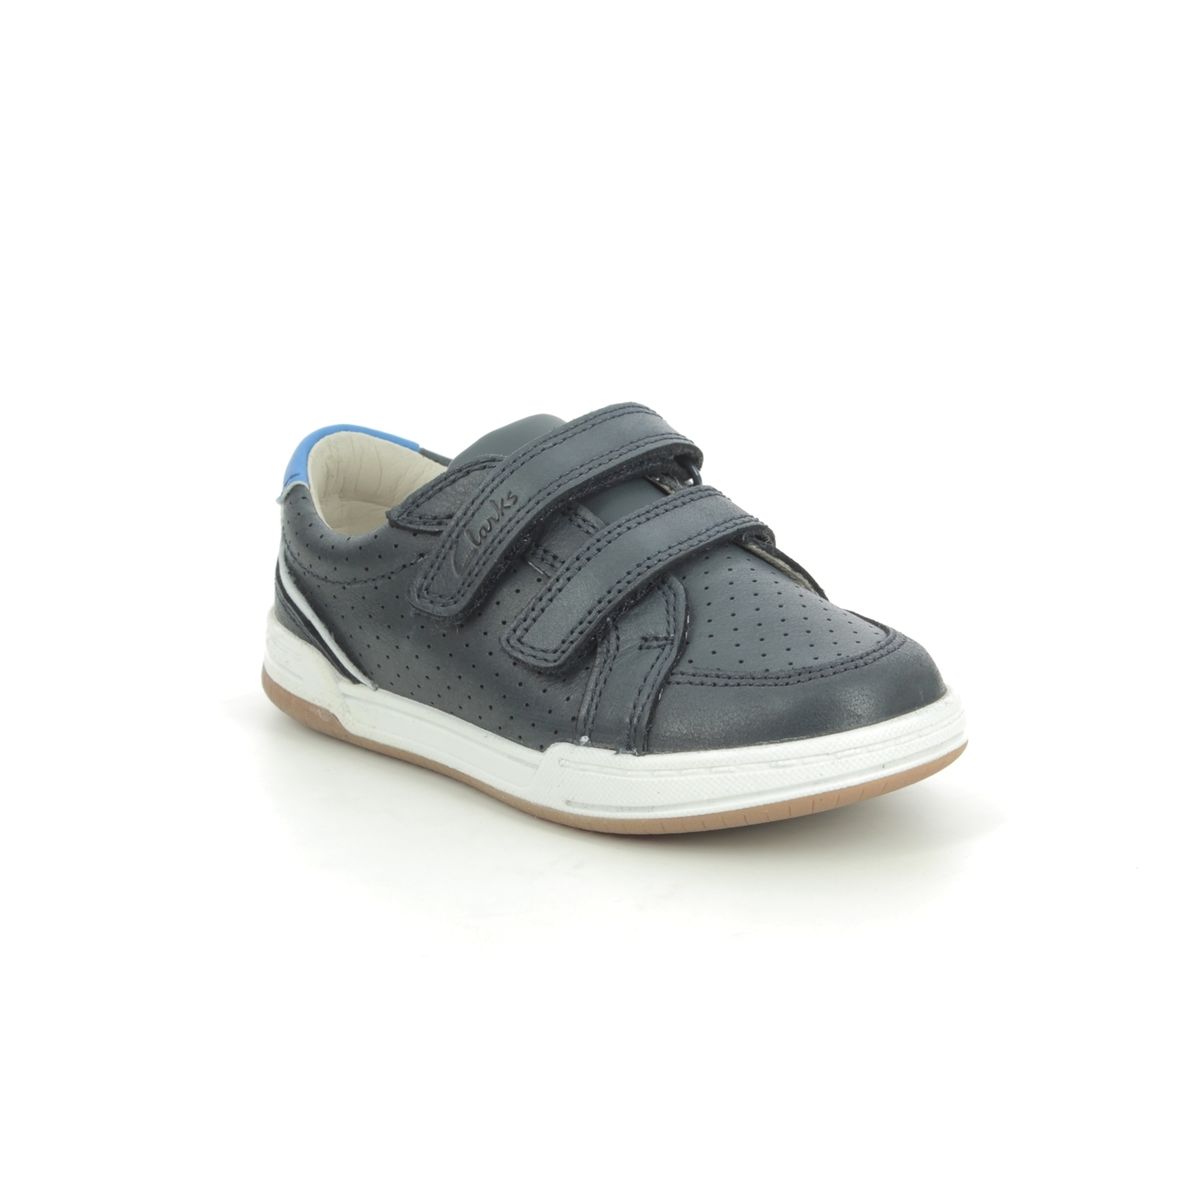 Clarks Fawn Solo T Navy Leather Kids Boys Toddler Shoes 589887G In Size 4 In Plain Navy Leather G Width Fitting For kids